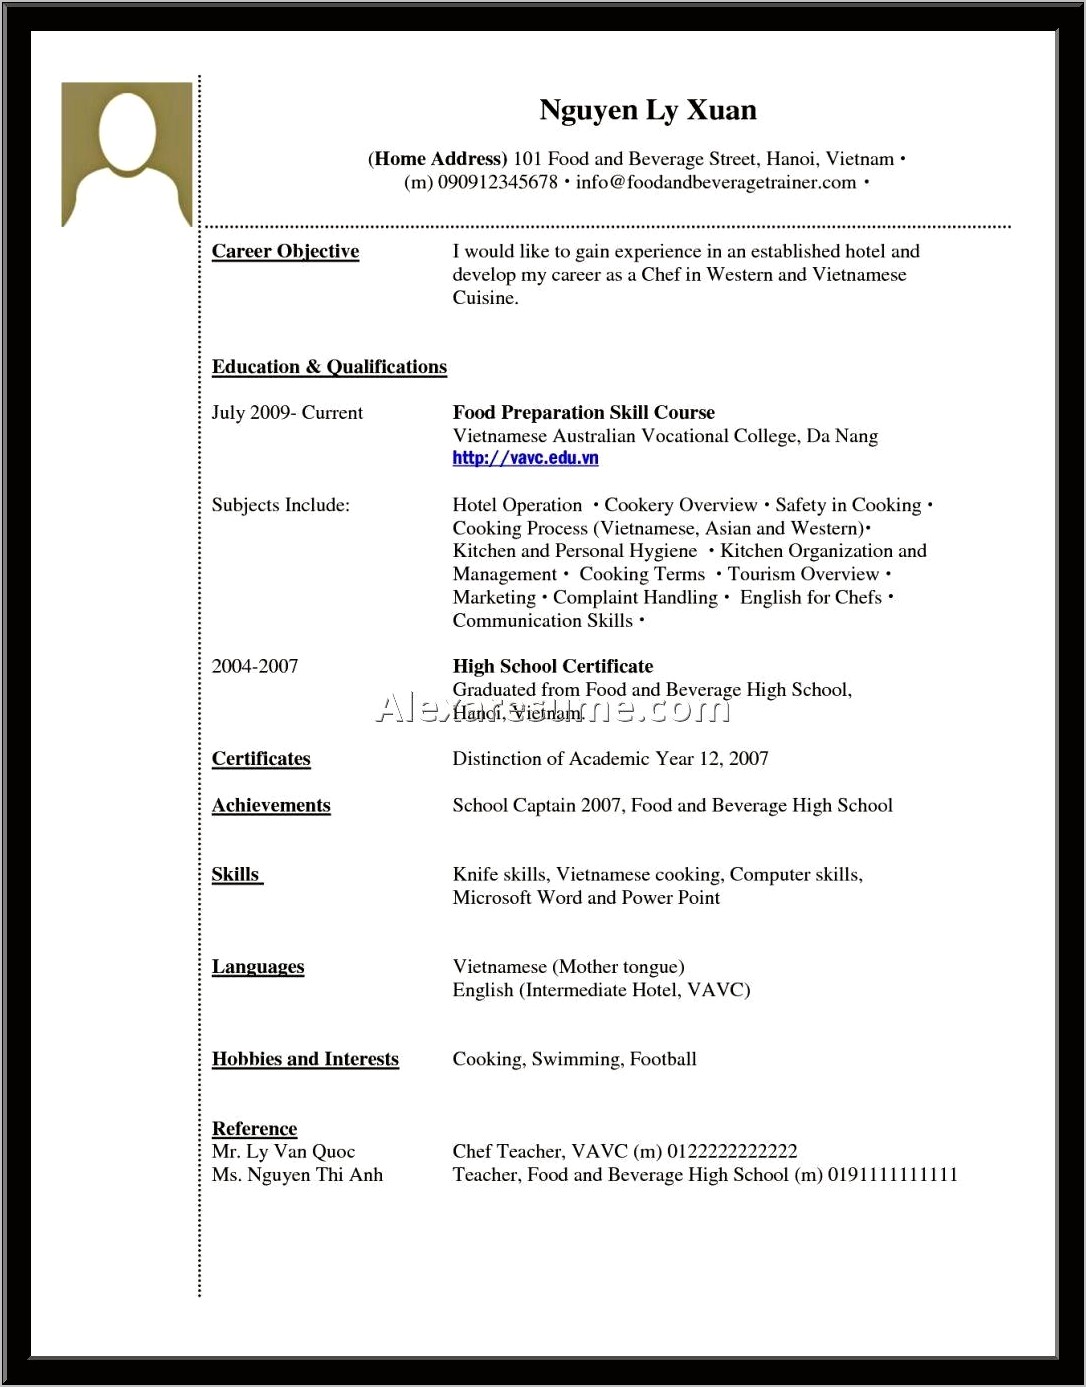 Creative Resume For School Administrative Assistant